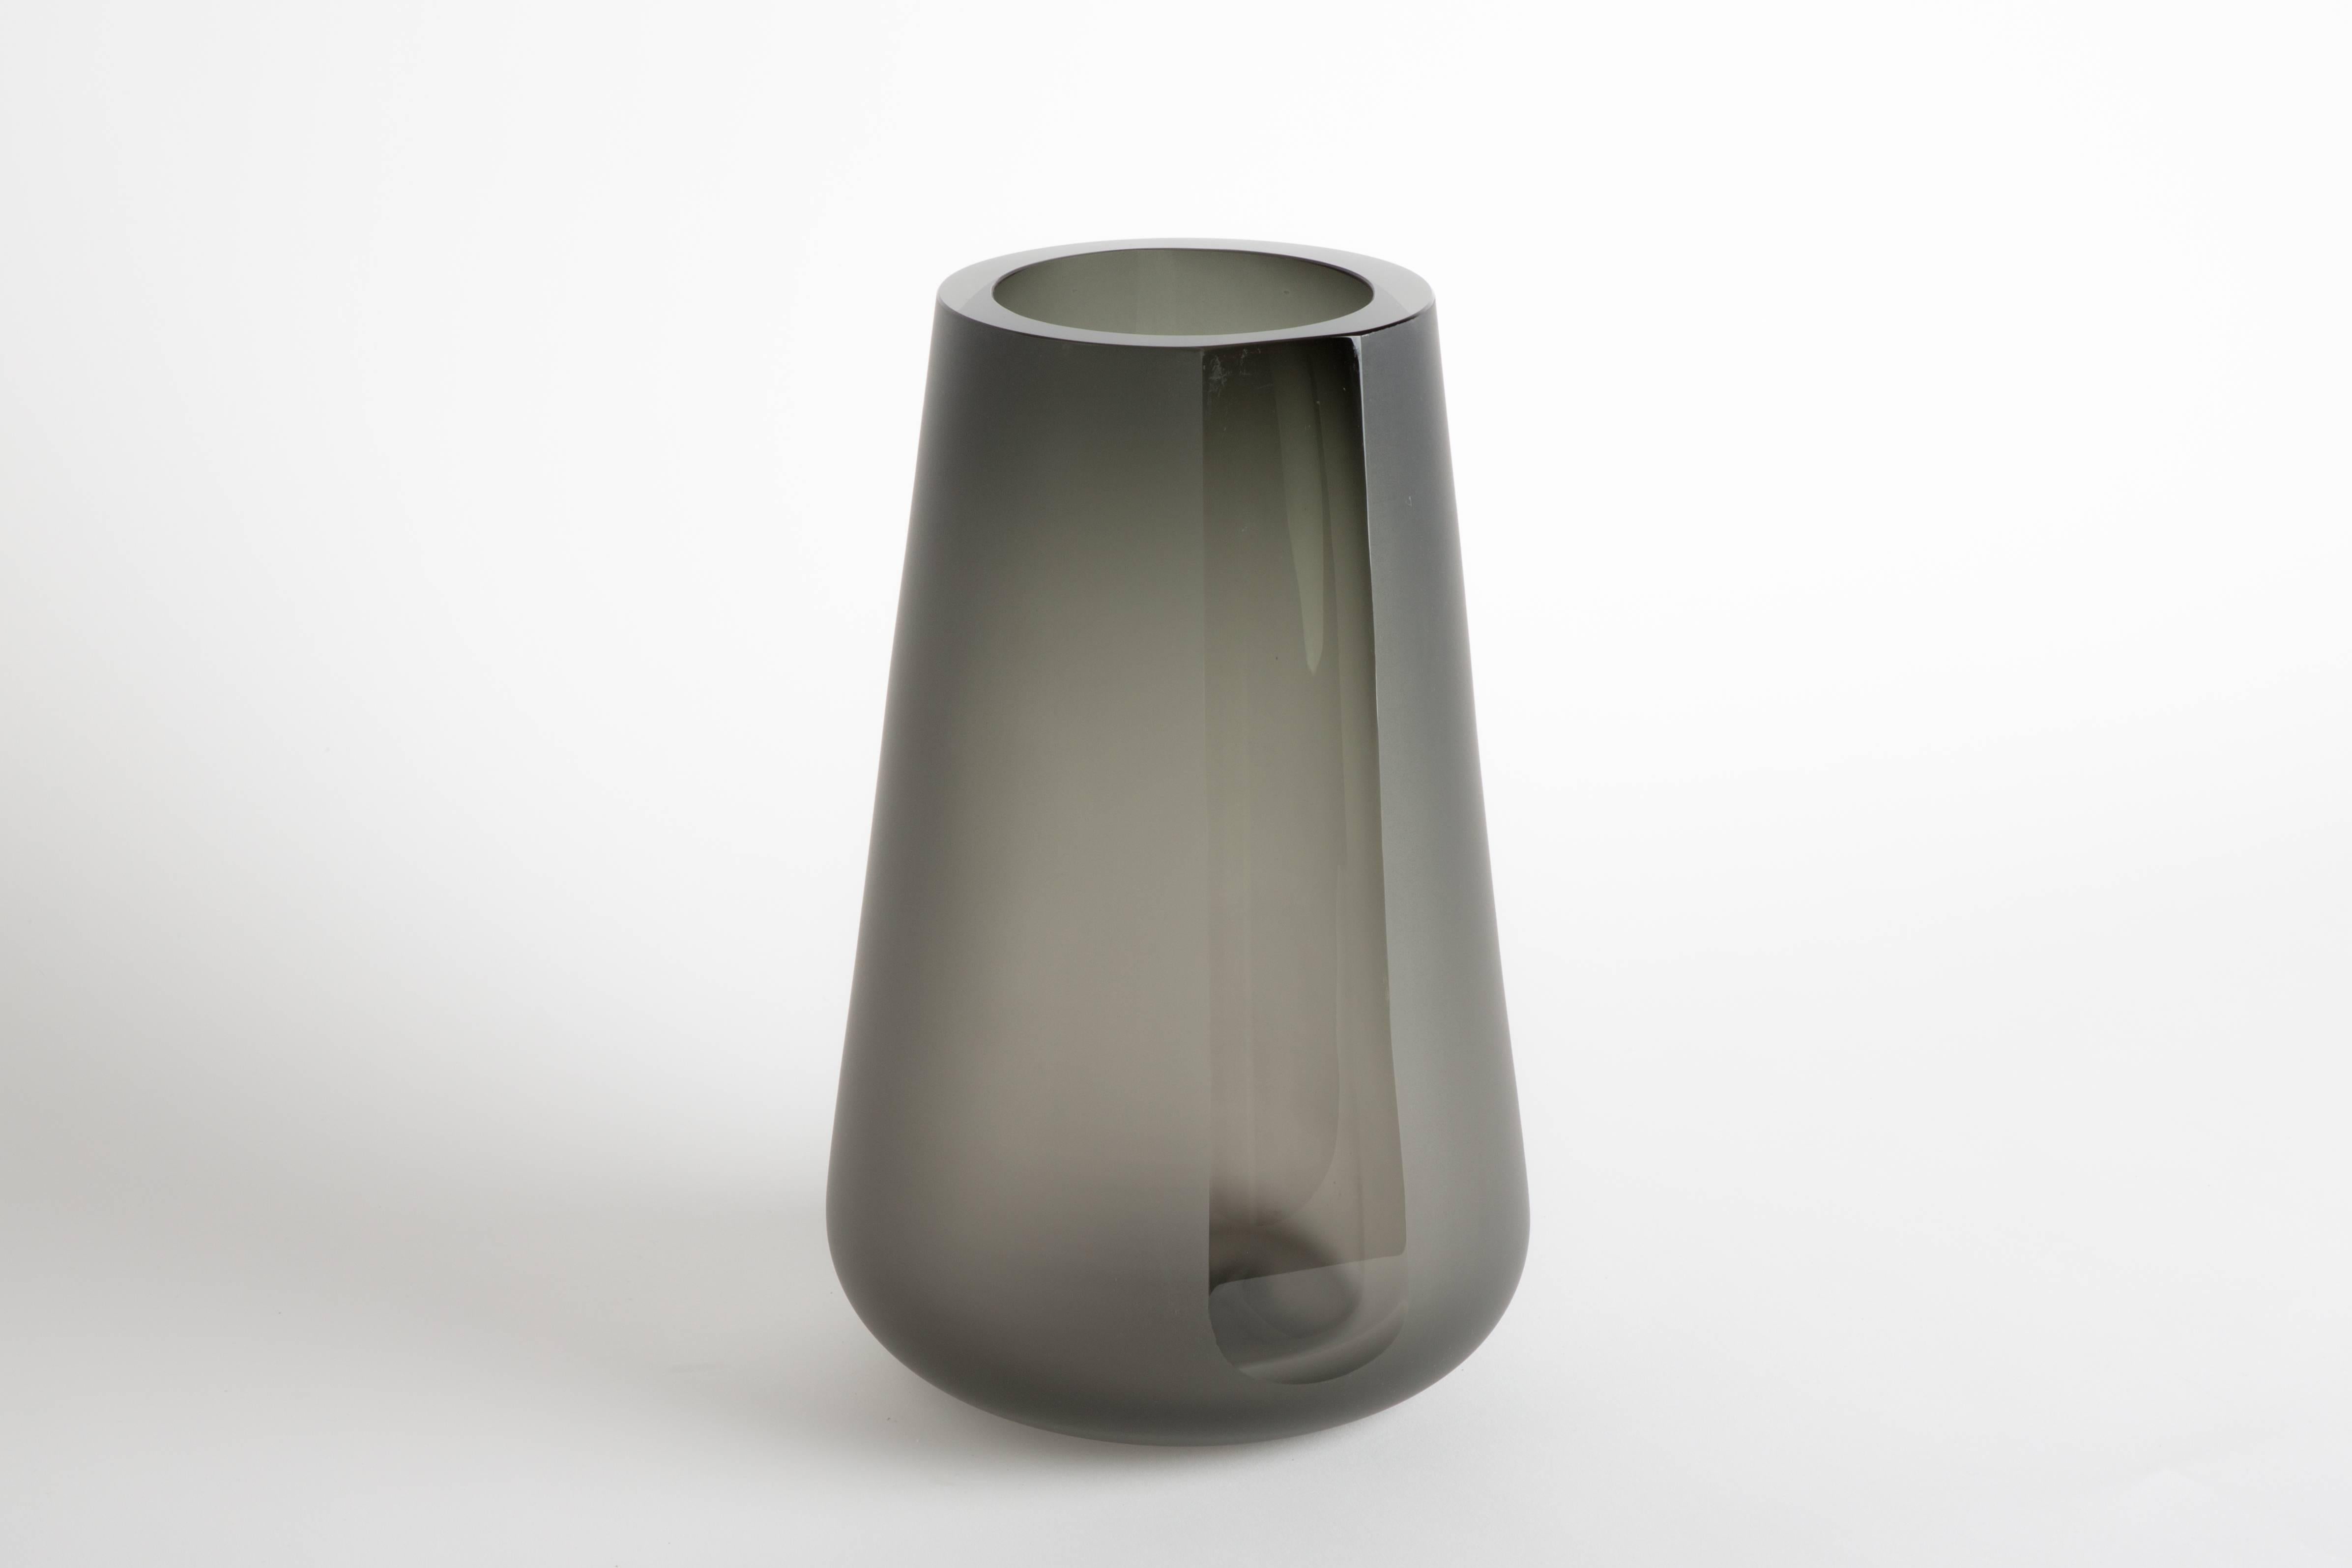 The Porto vase extra large is a simple exercise in optics and color. The Smoke Grey color and reflective light are diffused by a surface etching. A single panel, or "porto" is carved and brought to an optical polish on the side allowing